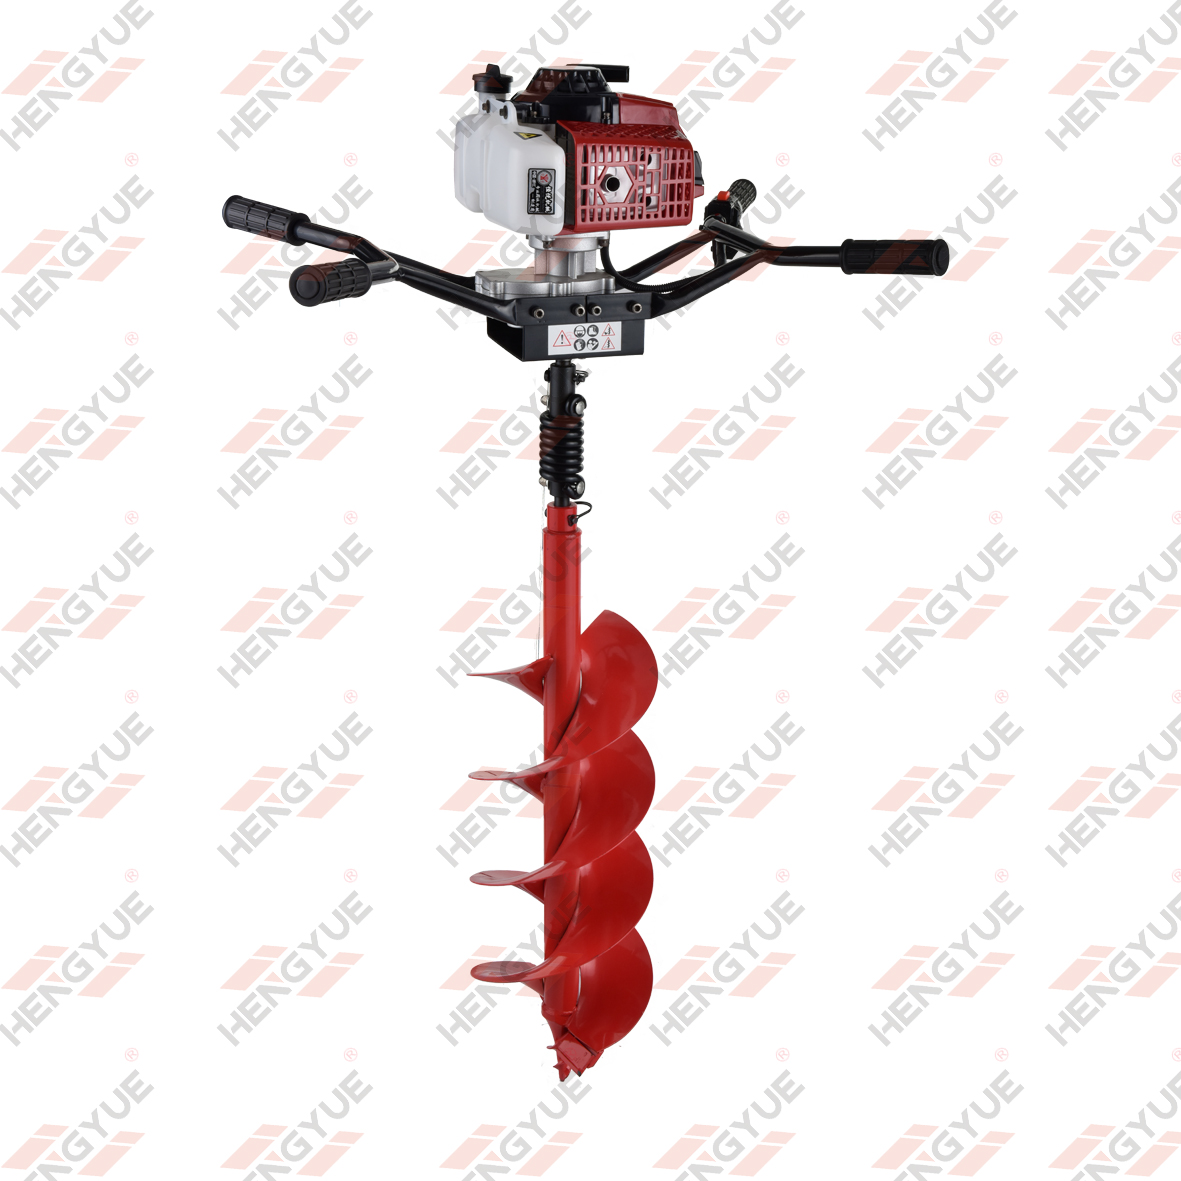 63/68cc 2 Man Operate Earth Auger Boormachine